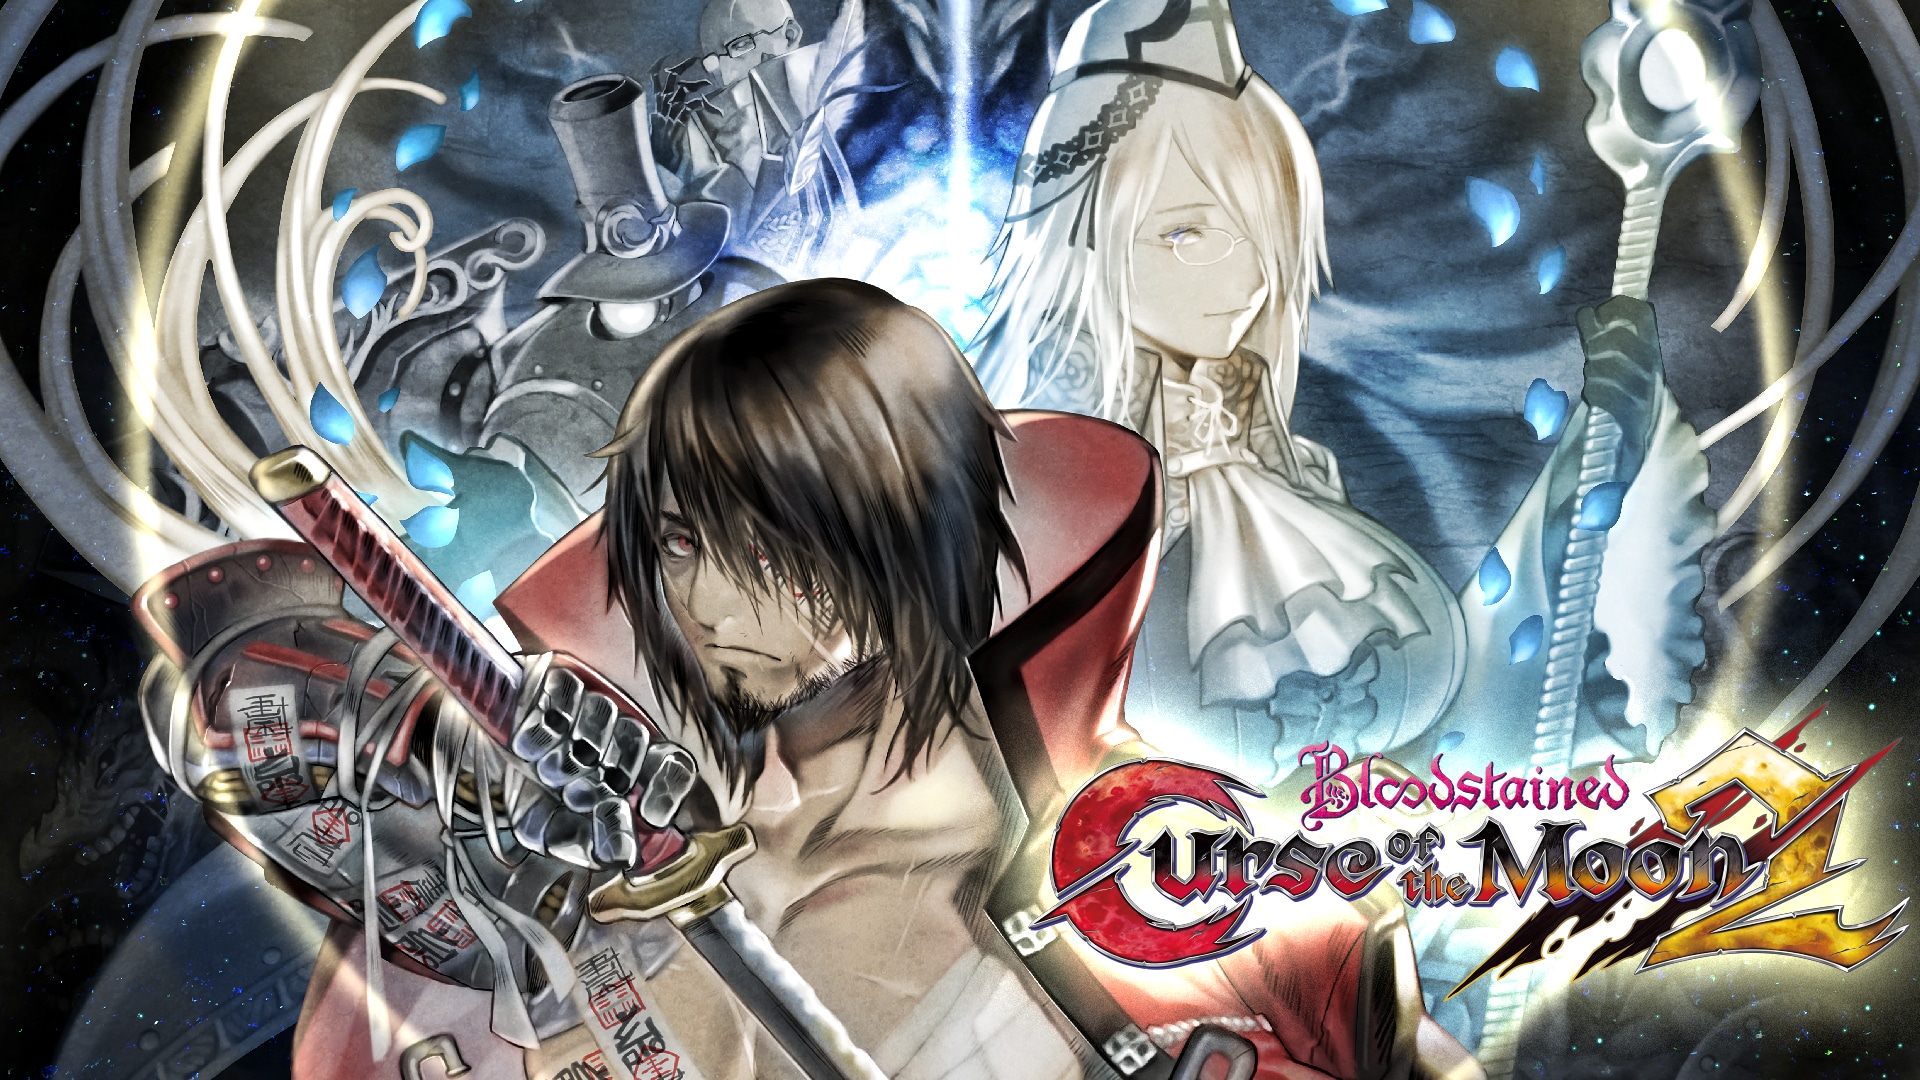 Bloodstained: Curse of the Moon 2 Receives Free Update Adding “Legend” Difficulty